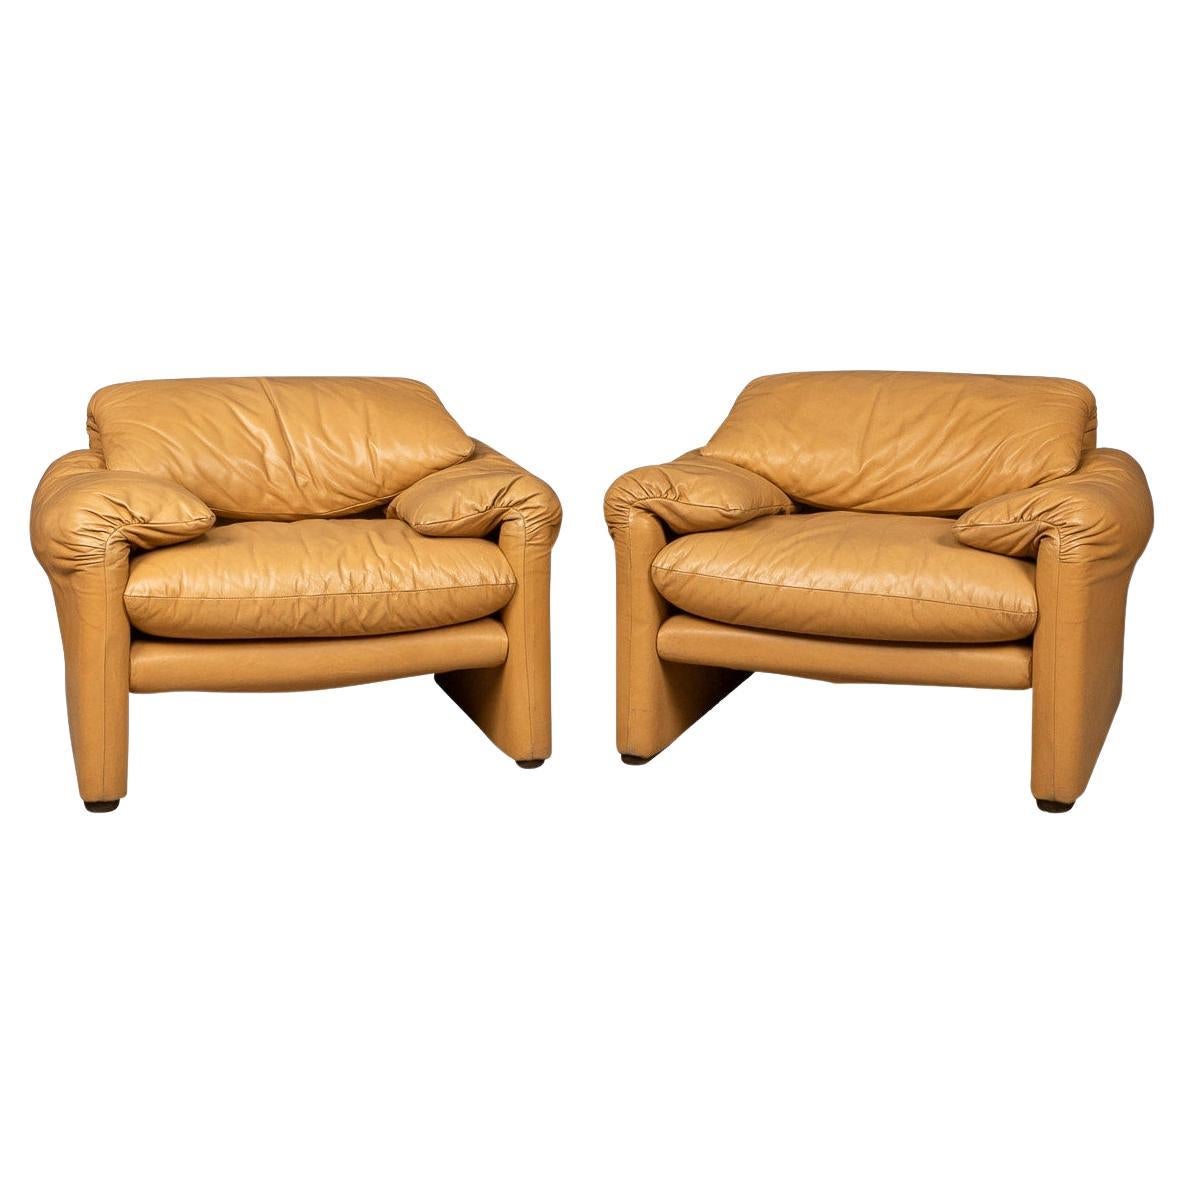 20th Century Pair of Leather Armchairs in by Vico Magistretti, Italy, c.1980